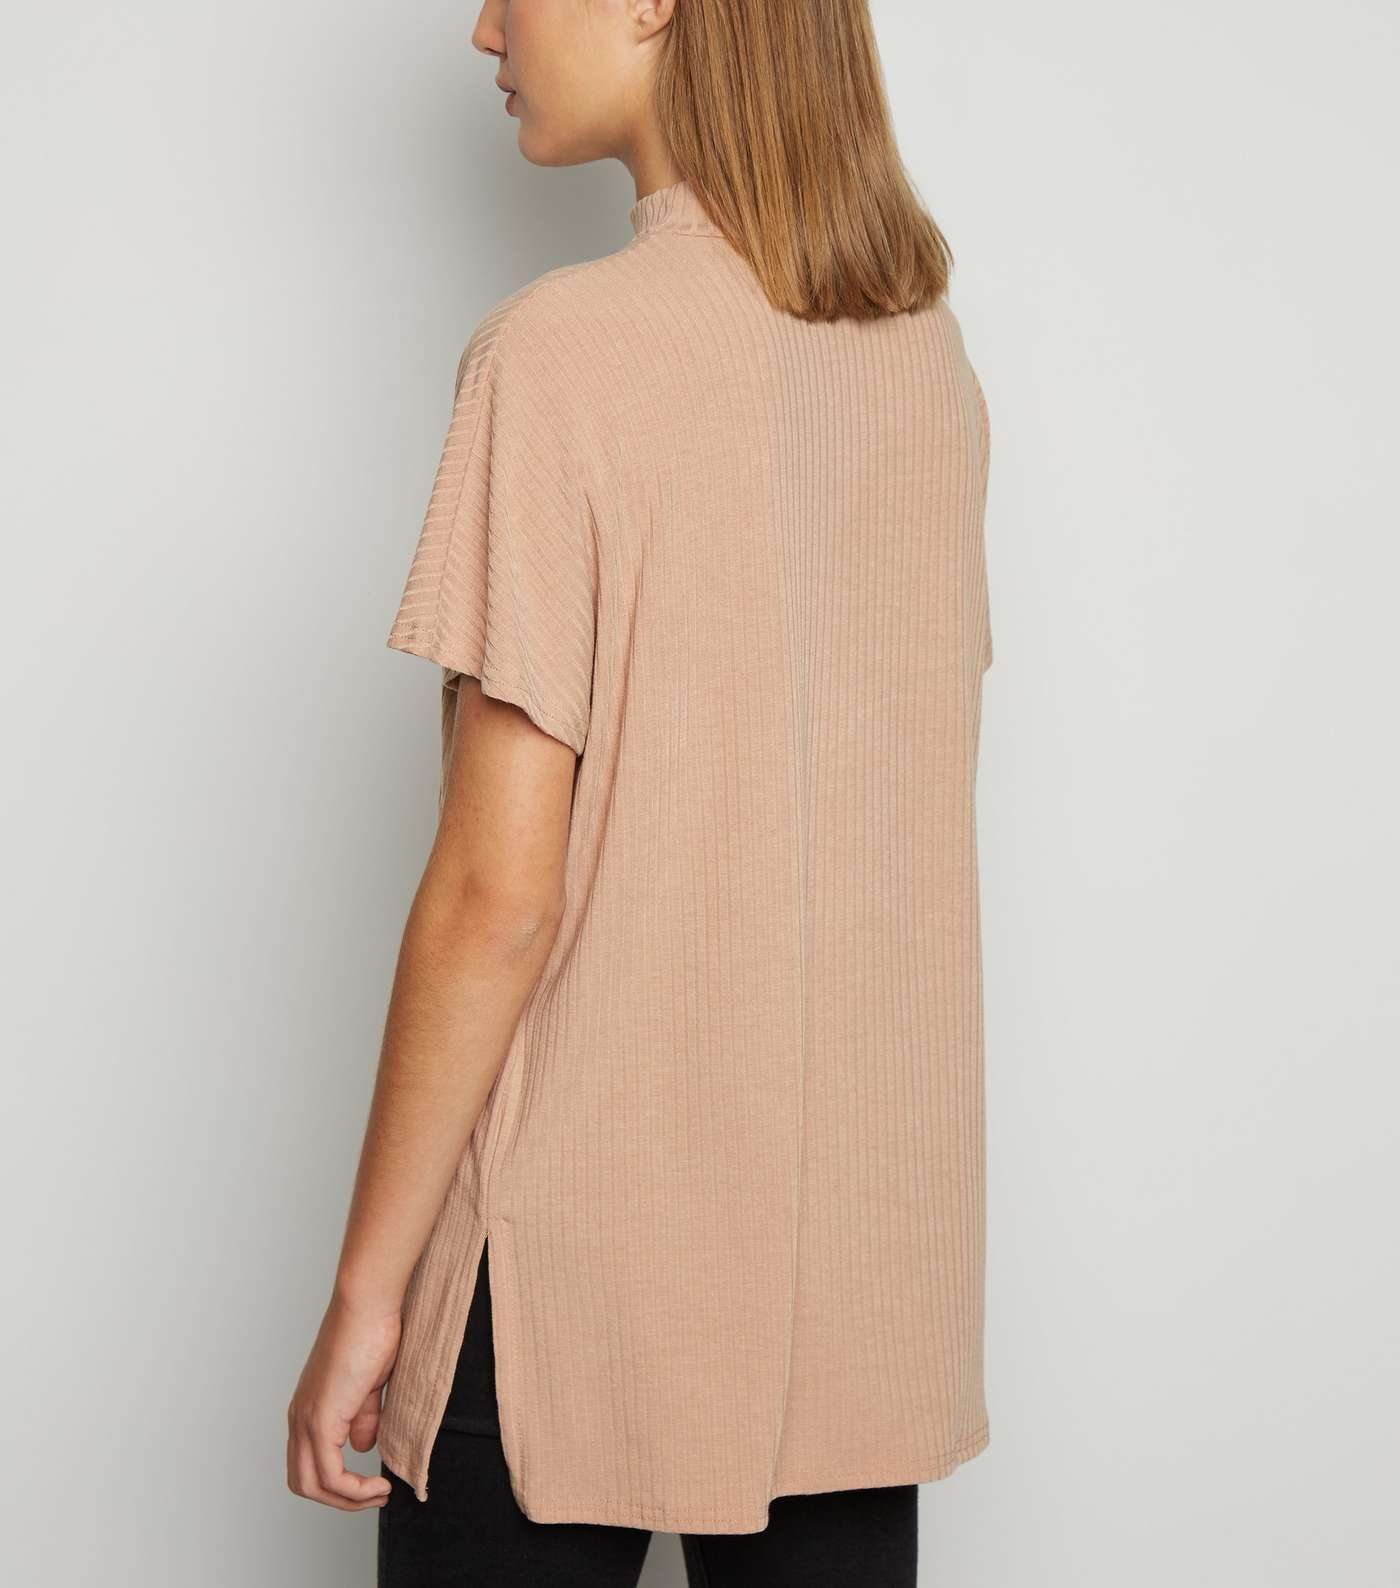 Camel Super Soft Ribbed Tunic Top Image 3